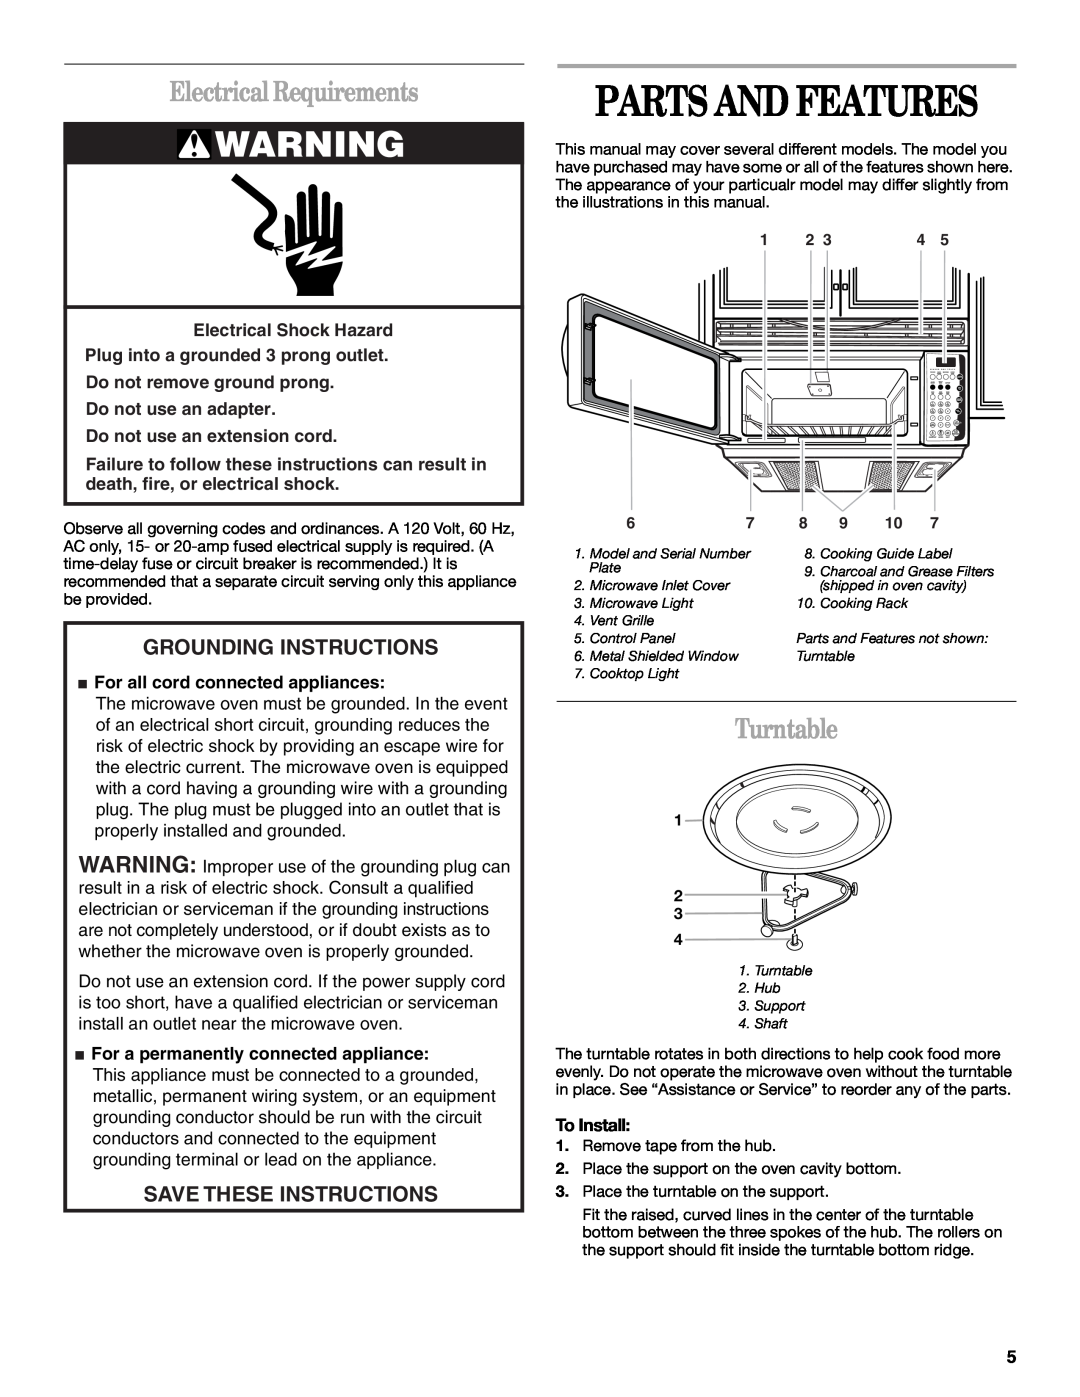 Whirlpool MH9180XL Parts And Features, Electrical Requirements, Turntable, Grounding Instructions, Save These Instructions 